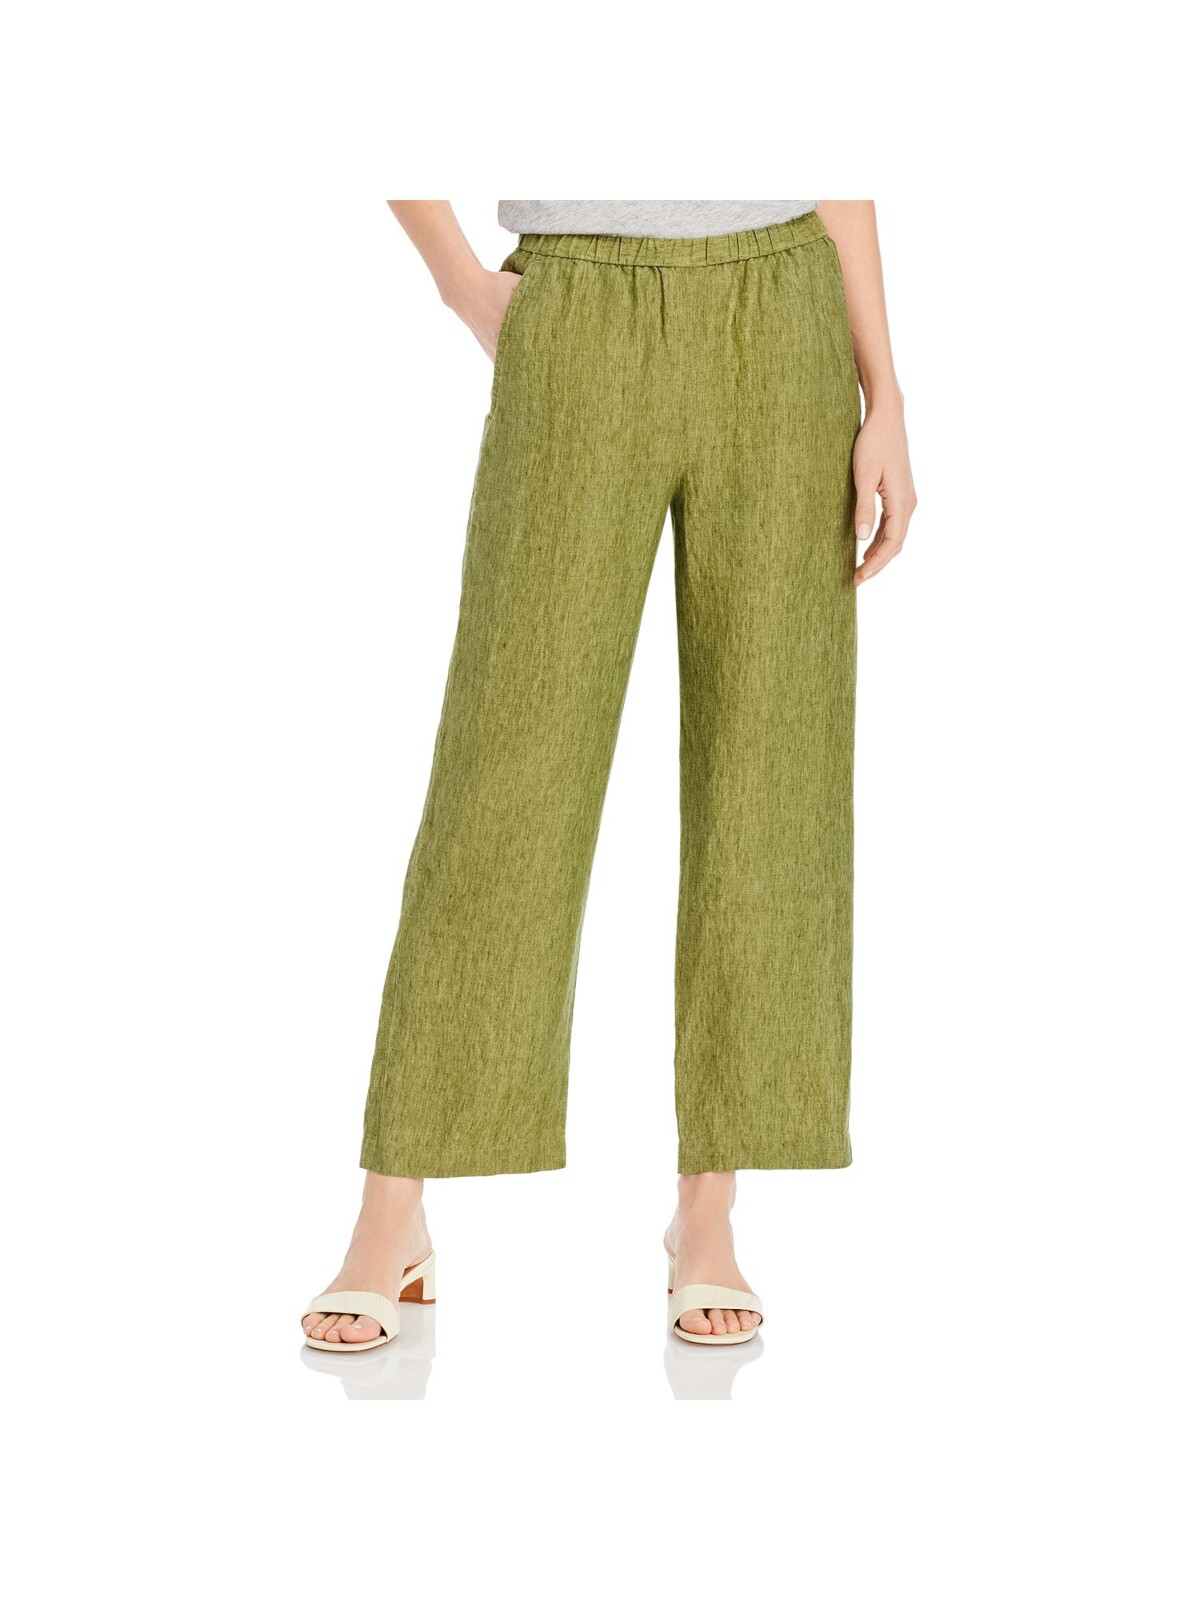 EILEEN FISHER Womens Green Pocketed Elastic Waist Wear To Work Cropped Pants Petites PM